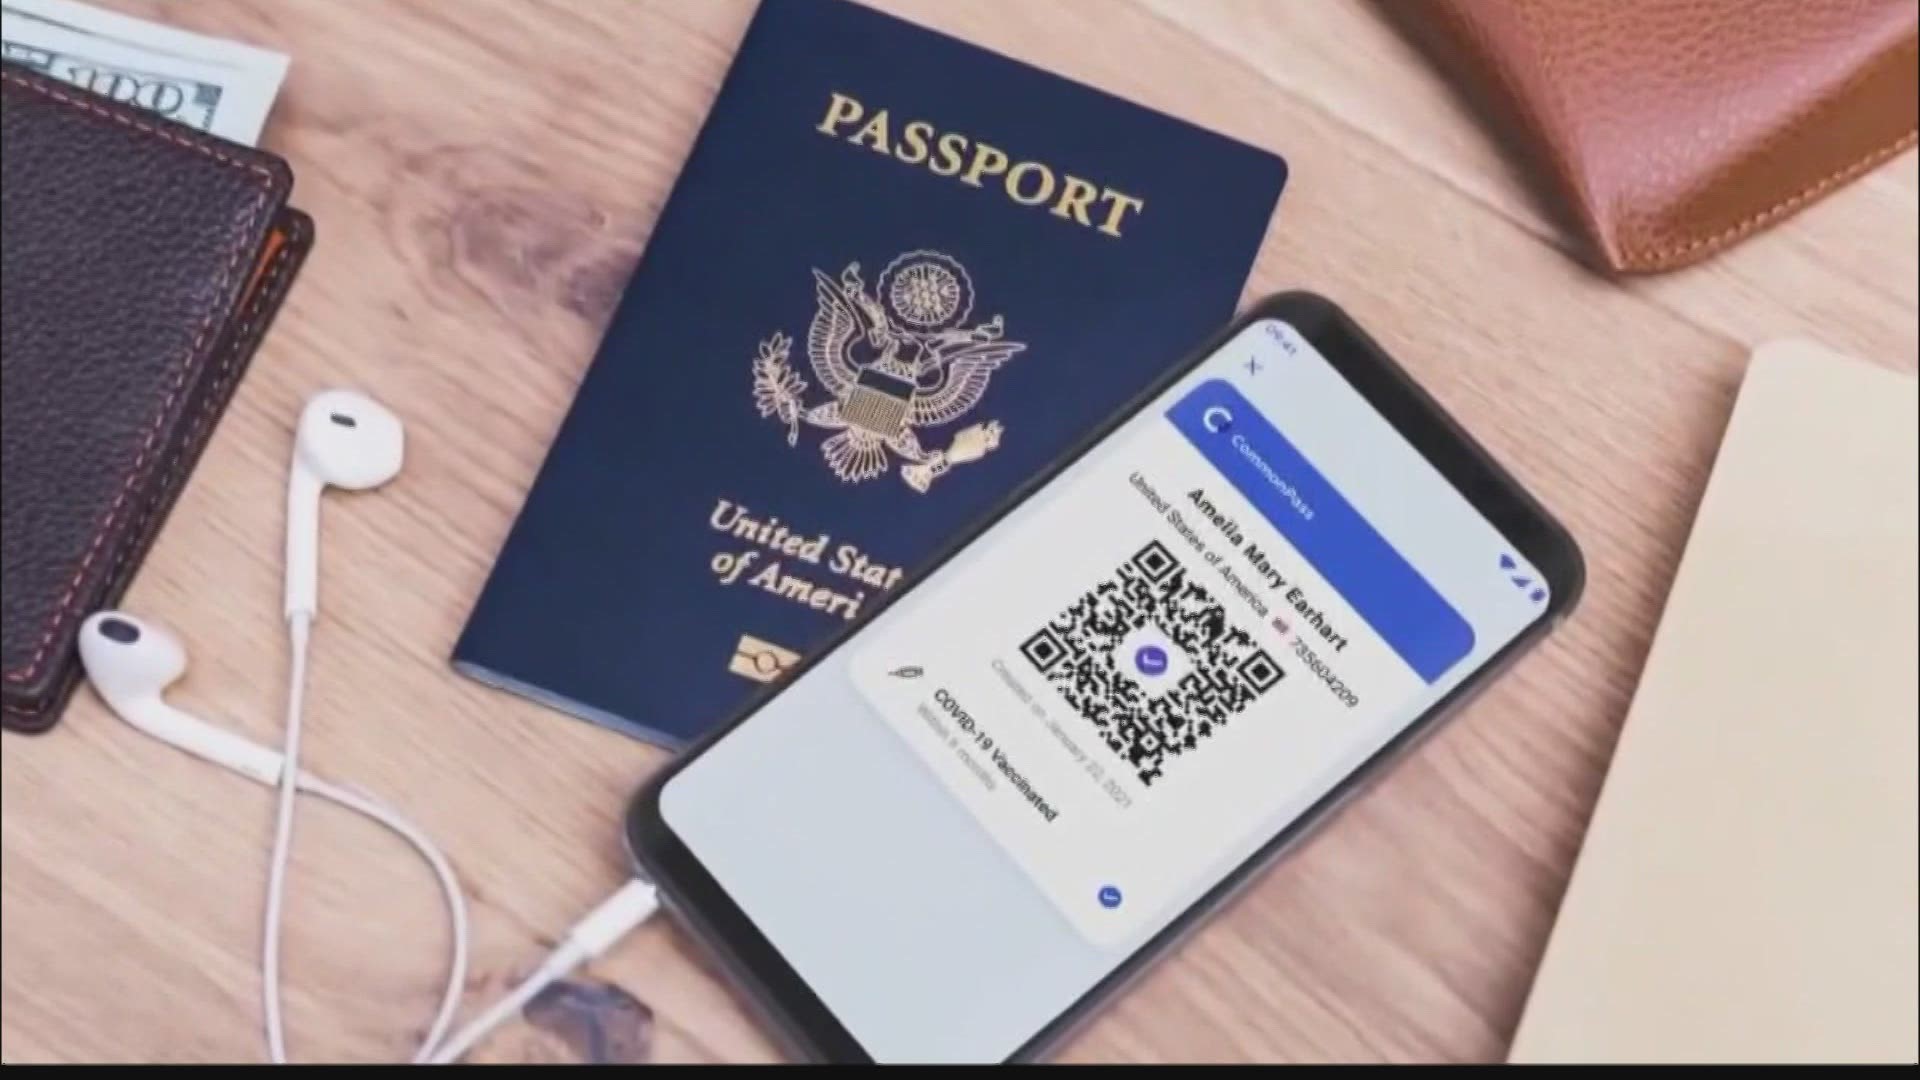 Madison County's probate judge says applications have doubled for passports as more people travel.